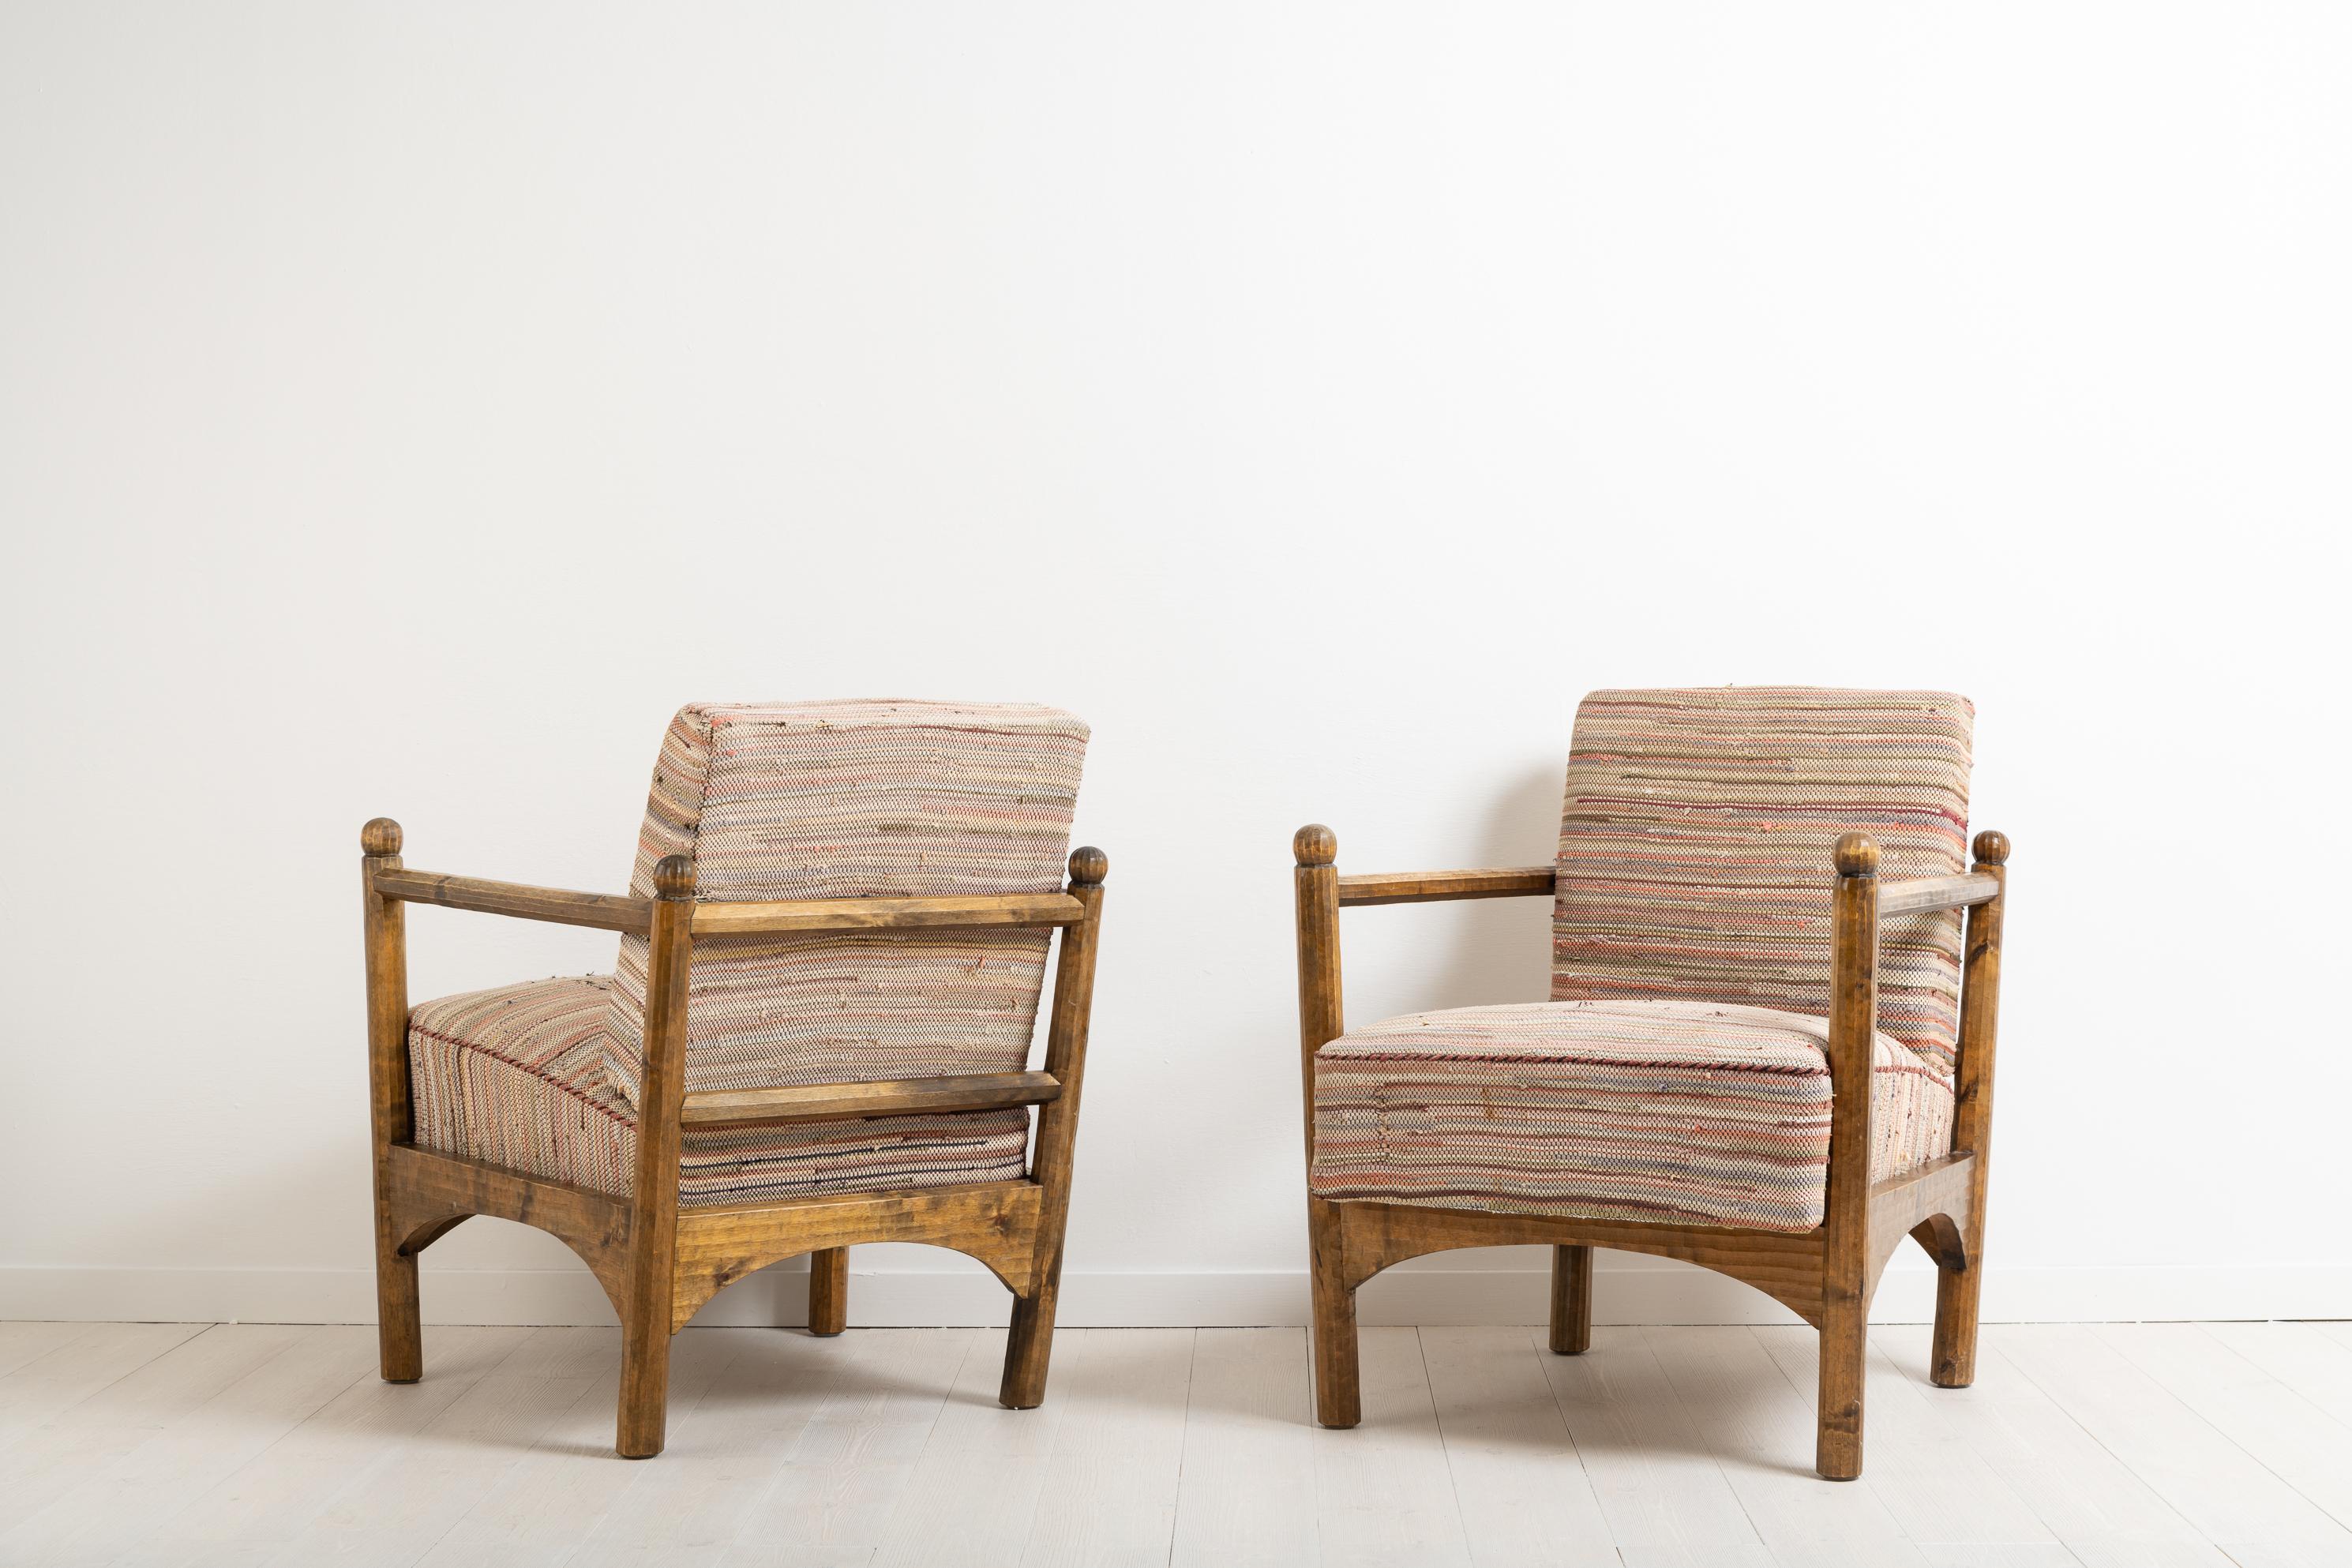 Birch Unusual Armchairs Swedish Grace from the Early 20th Century